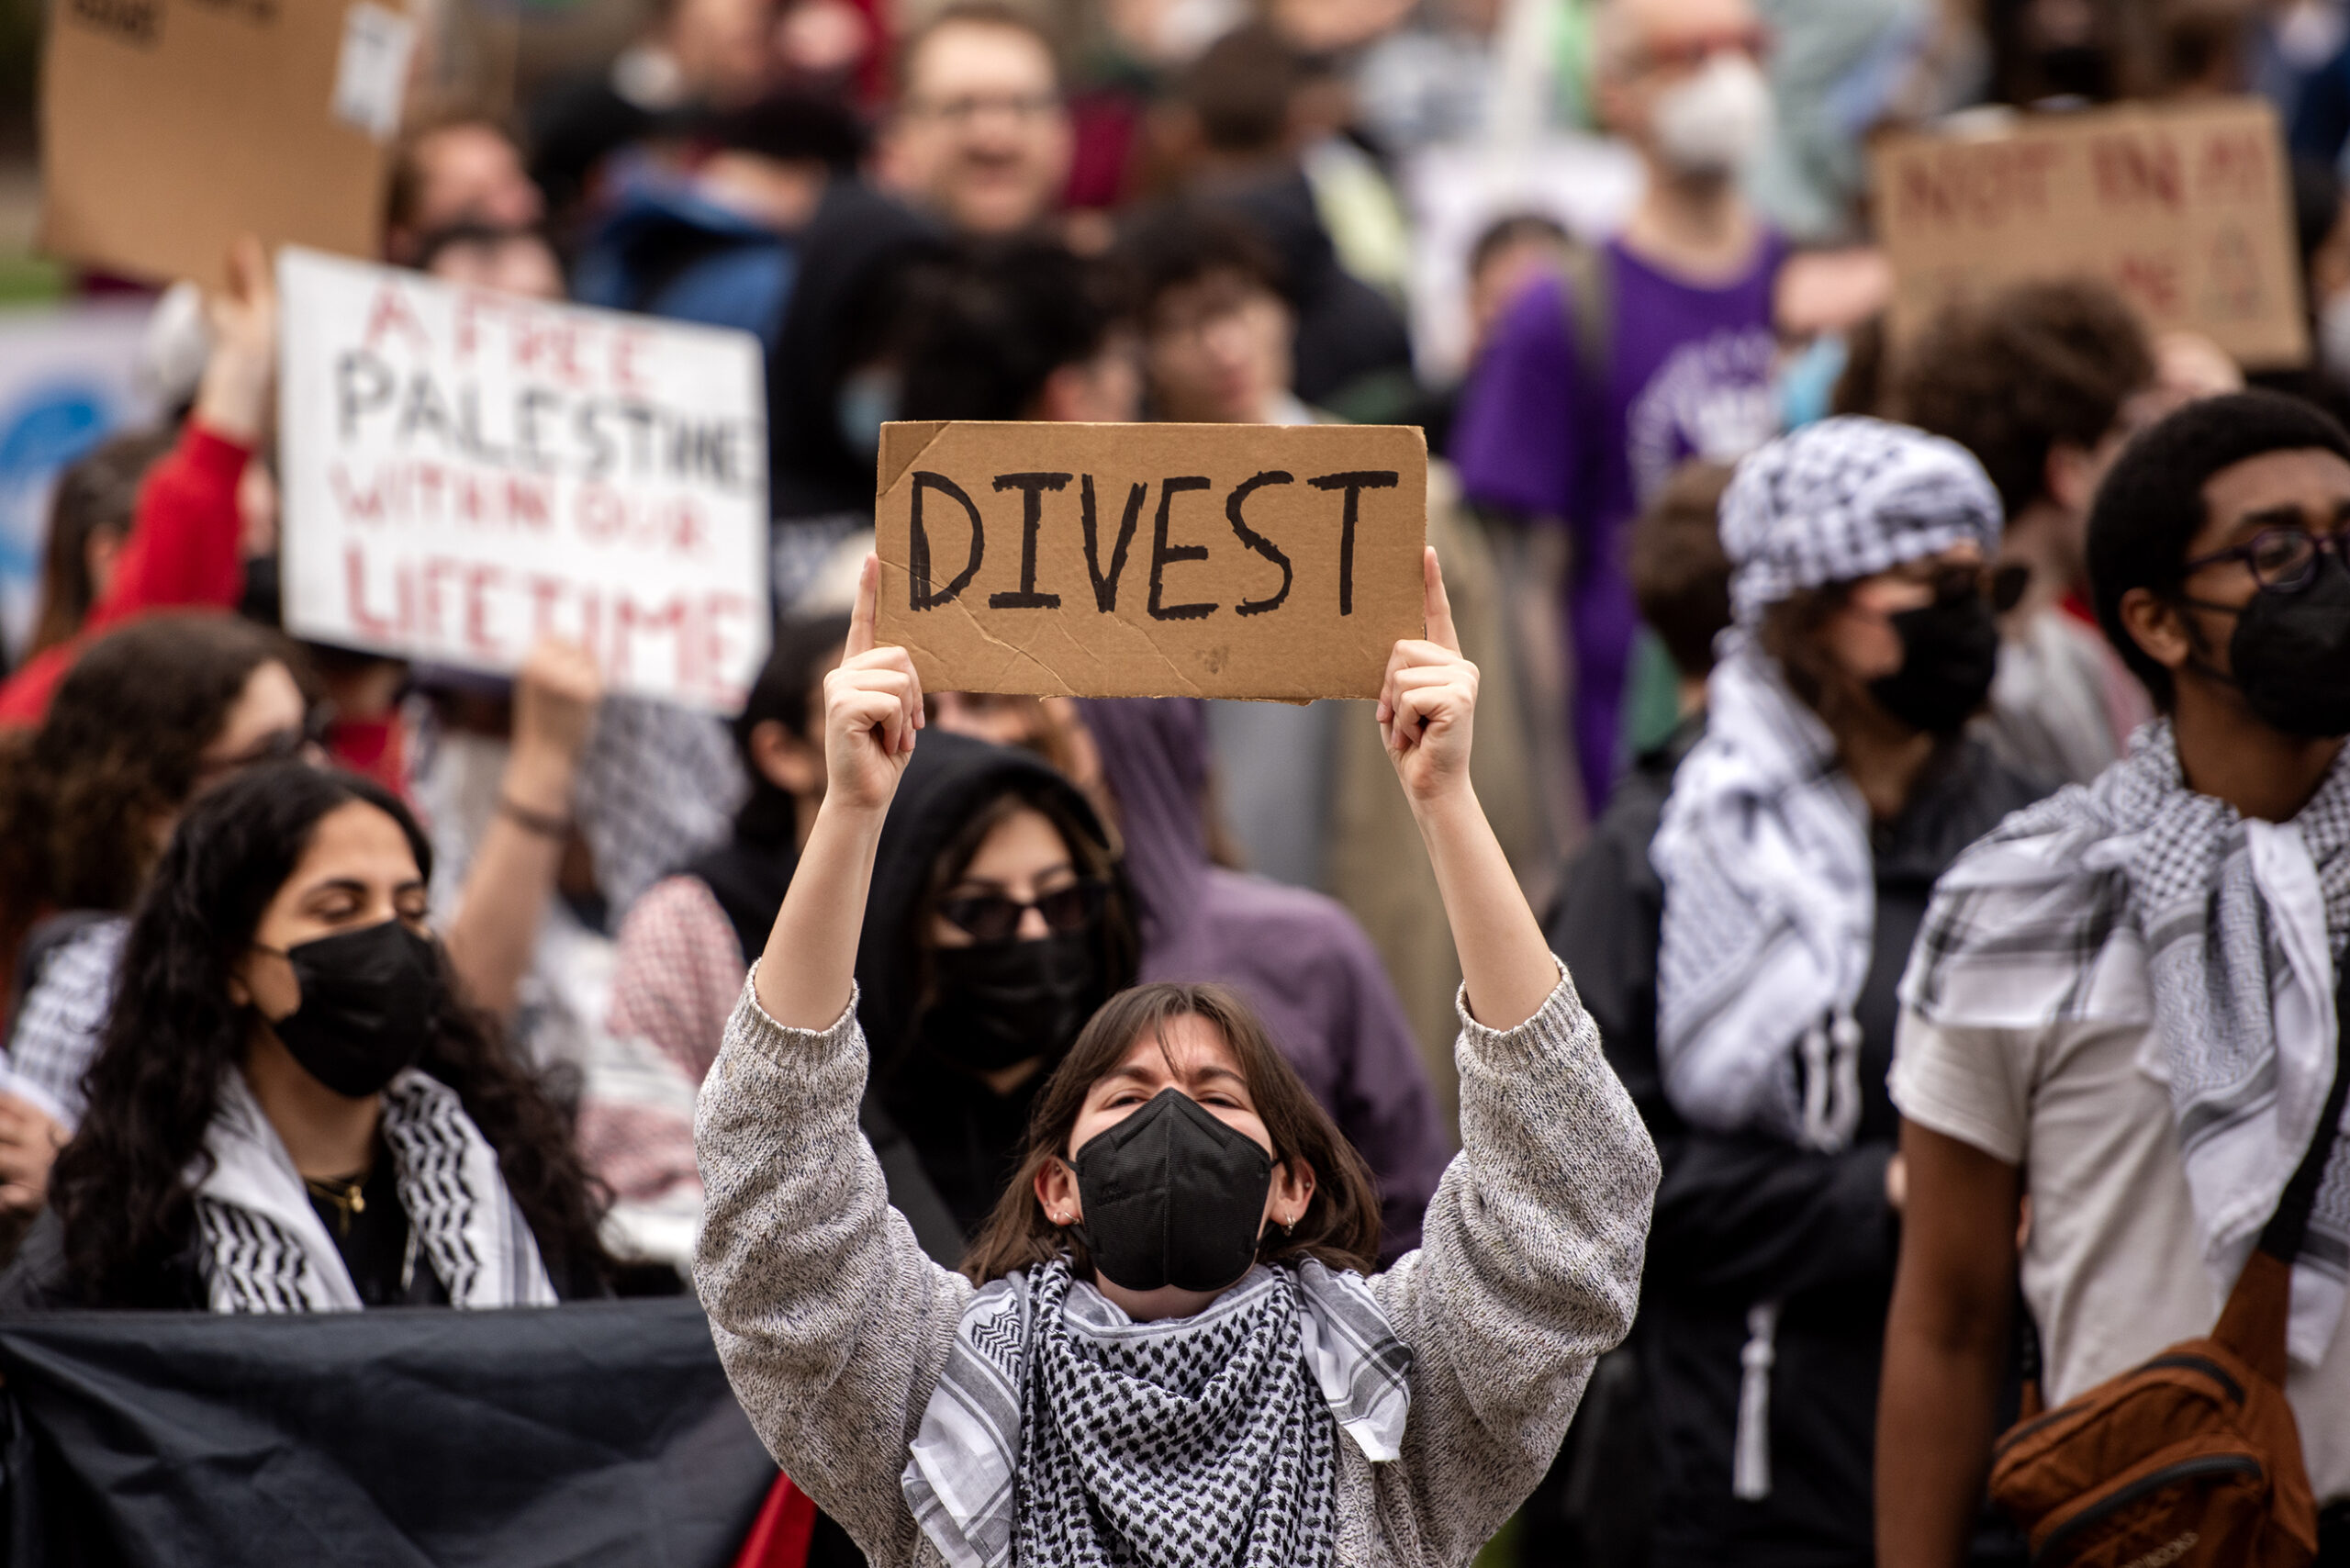 A woman holds a sign that says "DIVEST."